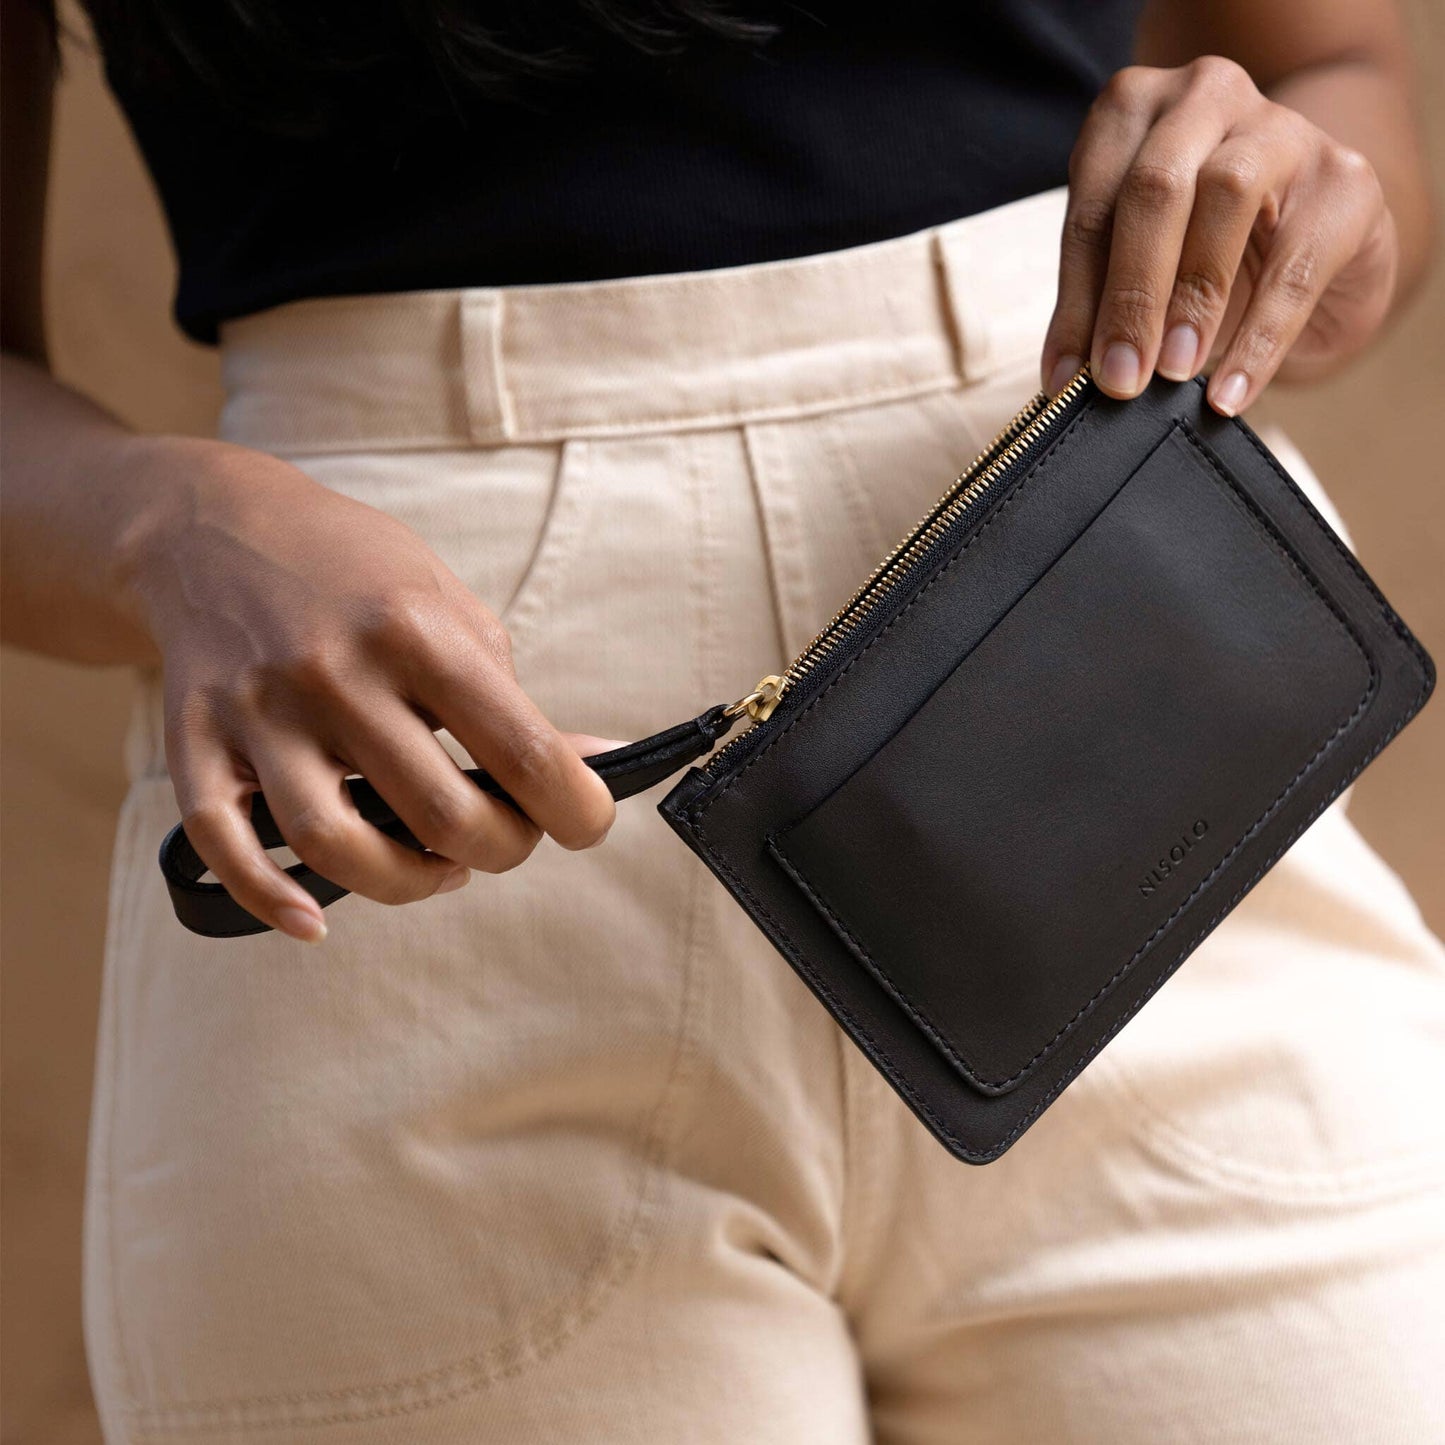 Nisolo Go To Wristlet Clutch -Large enough for your phone, keys, cards, and lip-gloss, yet compact enough to keep things simple, she’s the perfect, minimalistic companion. Crafted from high-quality, full-grain, water-resistant leather, and features wrist strap, Internal card holders and secure, zip-top closure. 100% Living Wages, 0% Net Carbon.